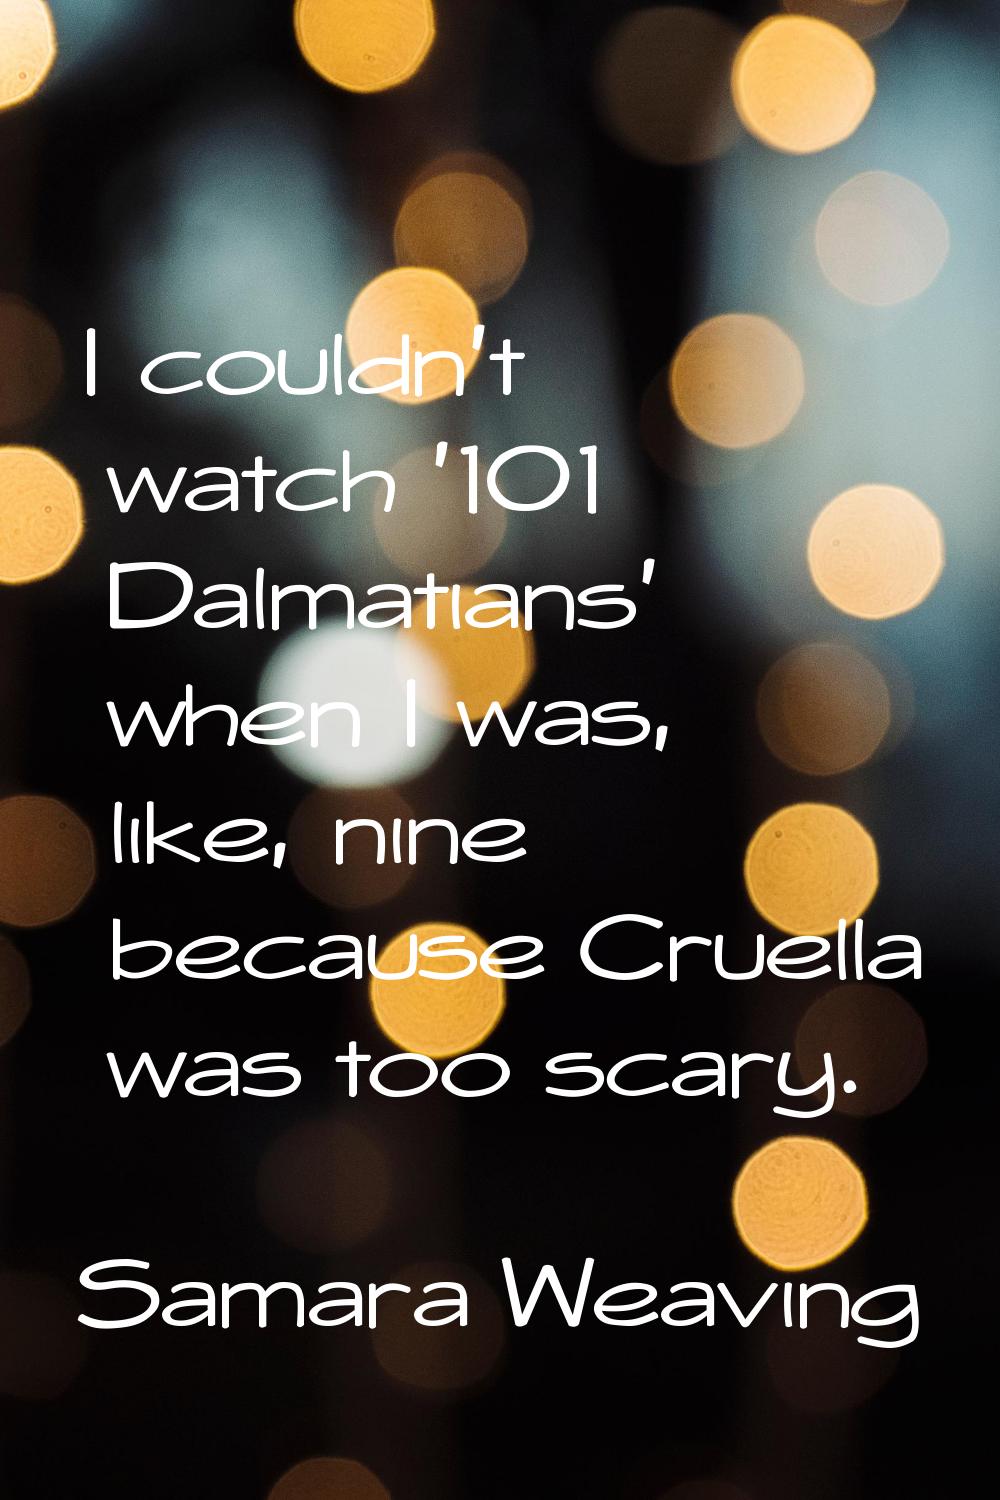 I couldn't watch '101 Dalmatians' when I was, like, nine because Cruella was too scary.